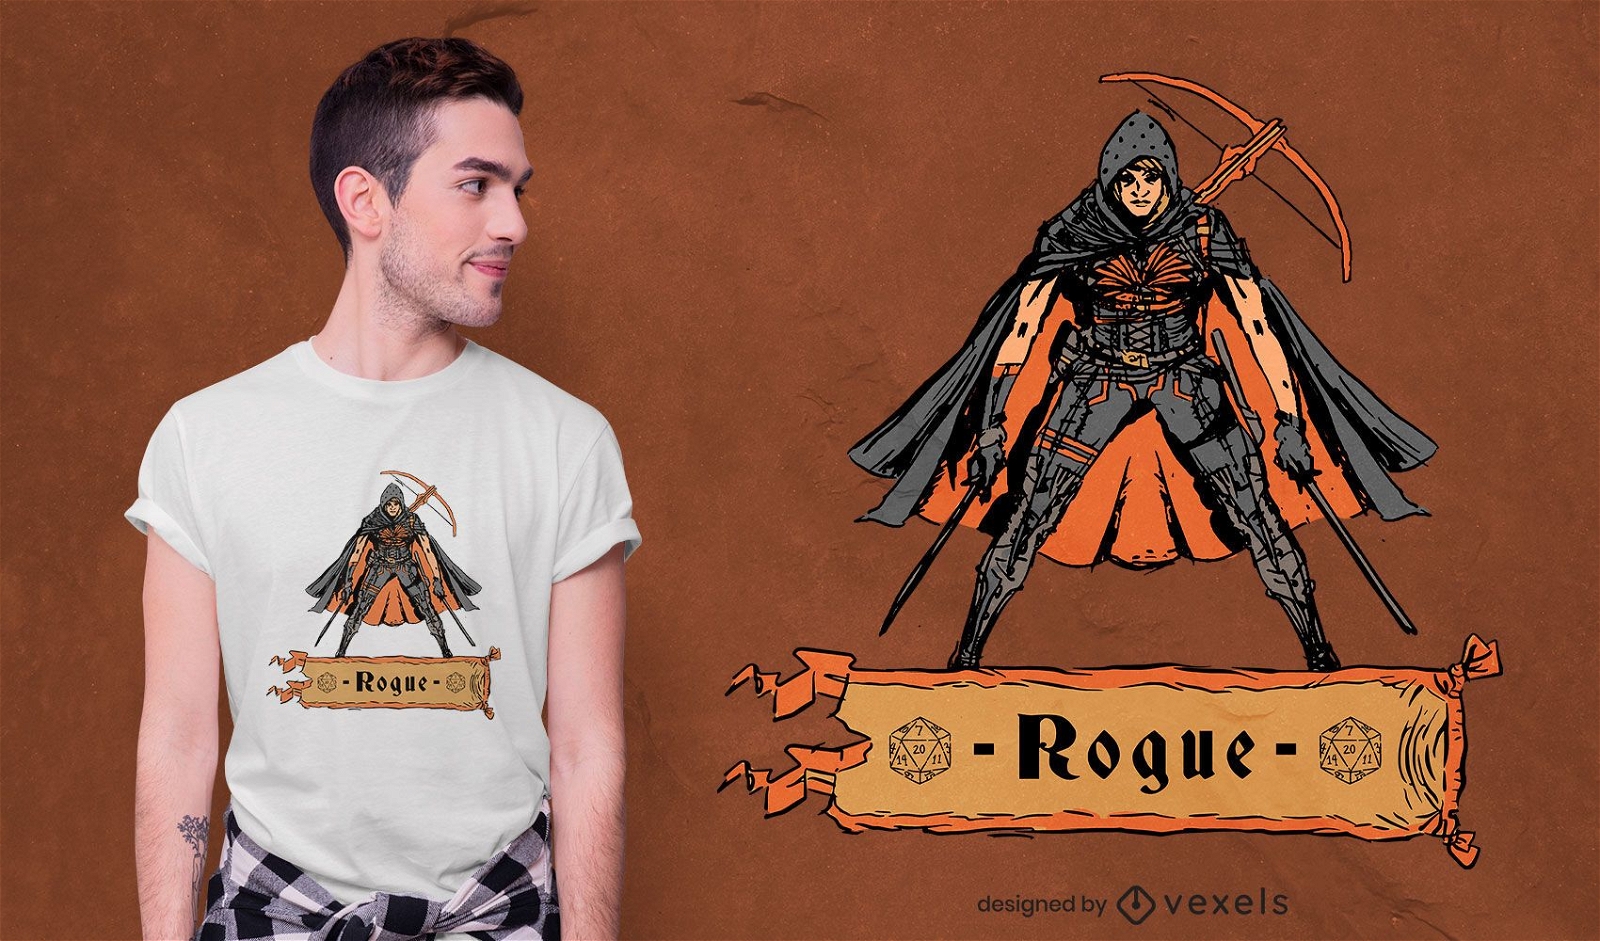 Rogue role playing character t-shirt design